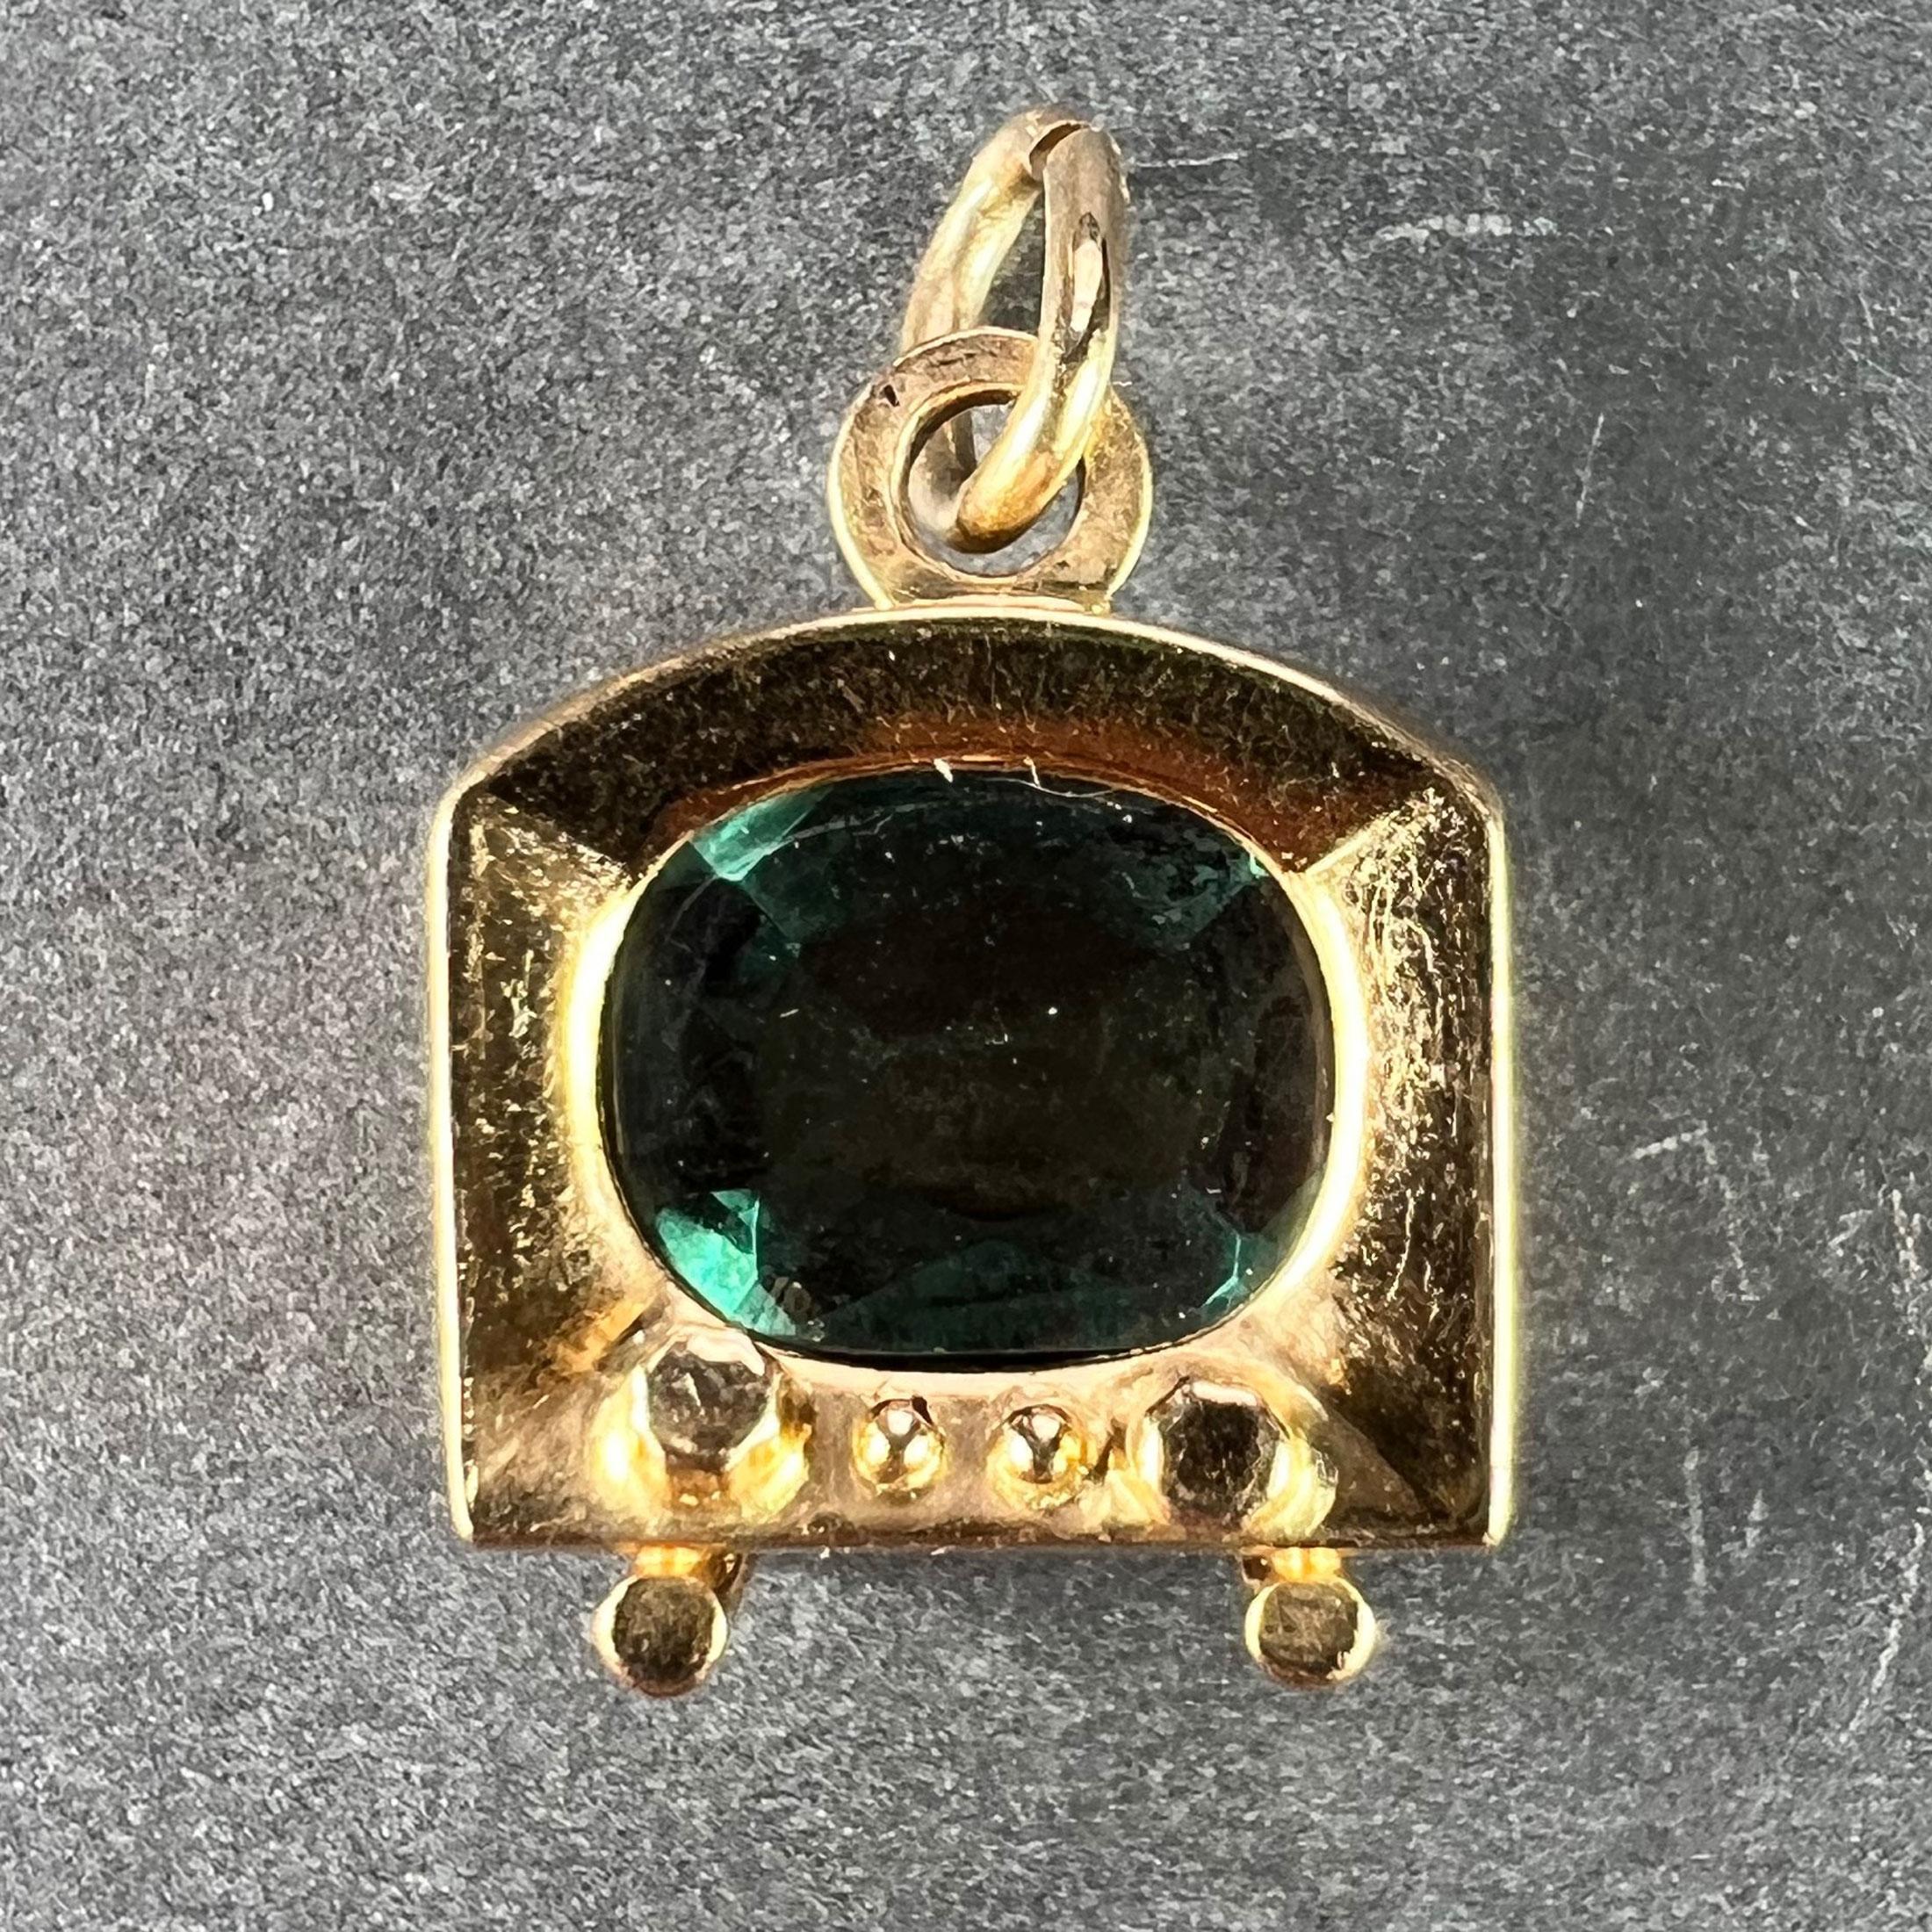 An Italian 18 karat (18K) yellow gold charm pendant designed as a TV or television with a green paste screen. Stamped 750 for 18 karat gold, 1AR for Italian manufacture and UnoAErre, along with their maker's mark.

Dimensions: 1.7 x 1.3 x 1 cm (not